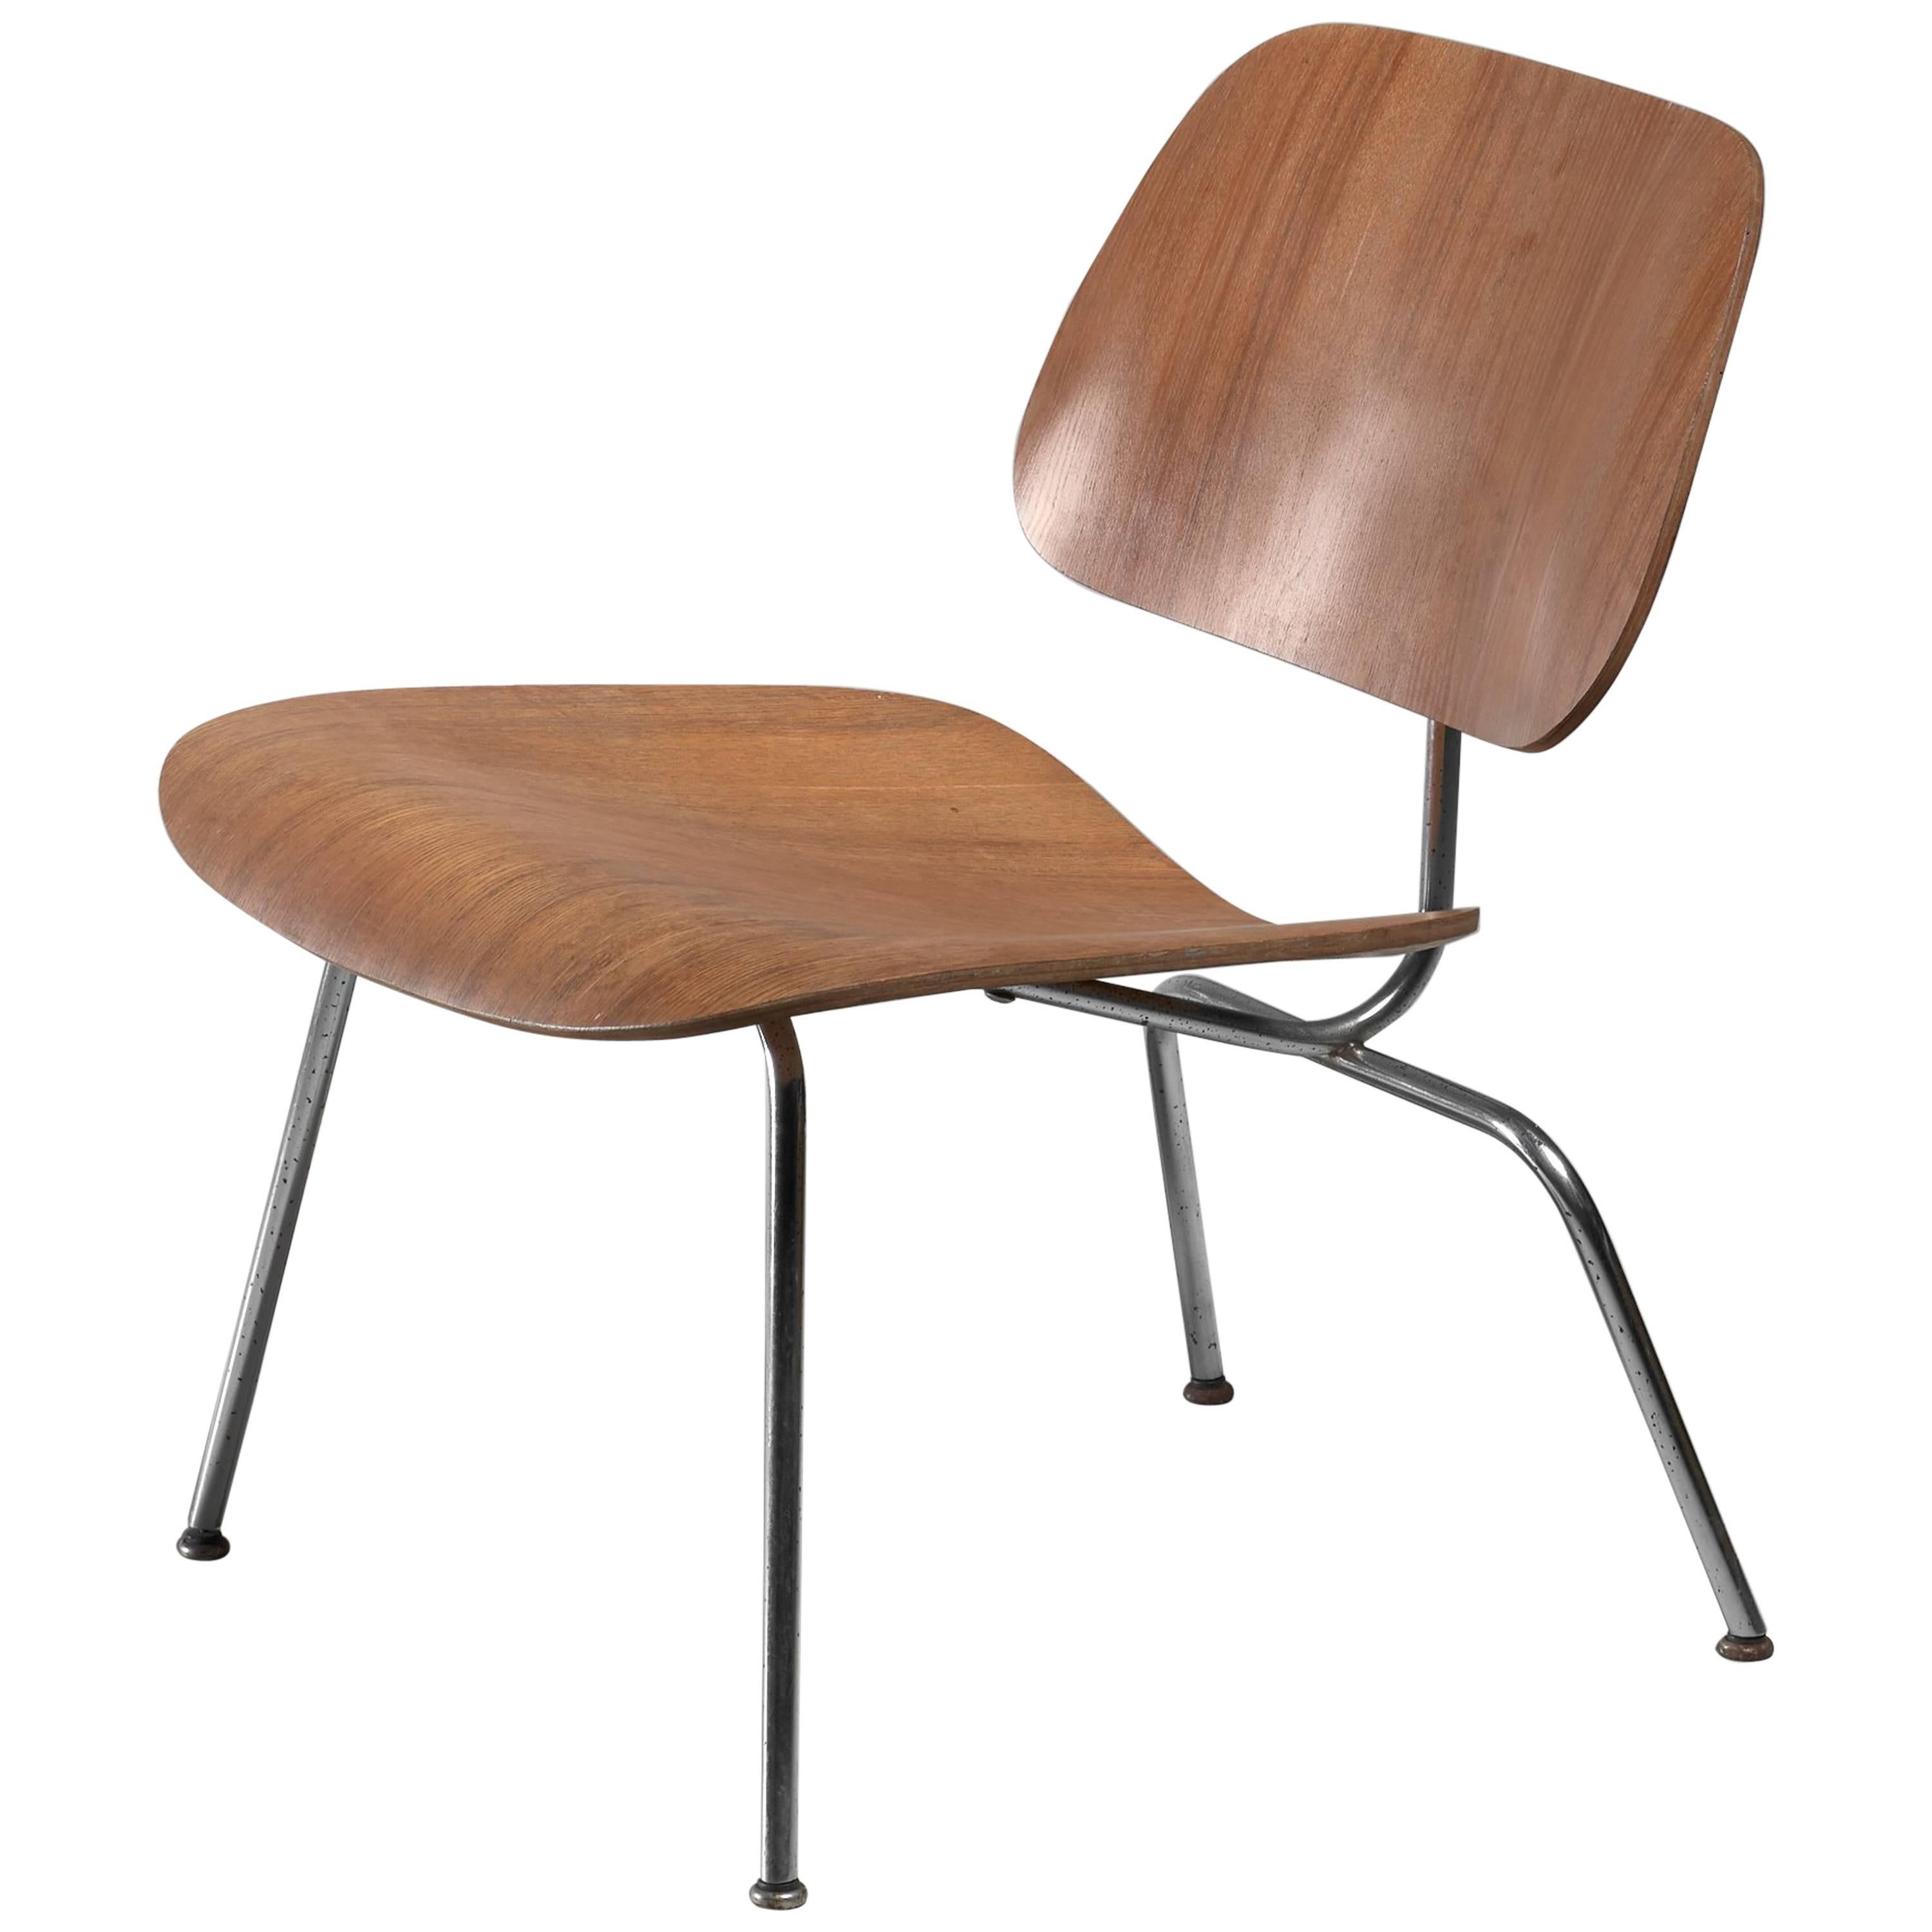 LCM Chair in Walnut by Charles Eames for Herman Miller, 1950s